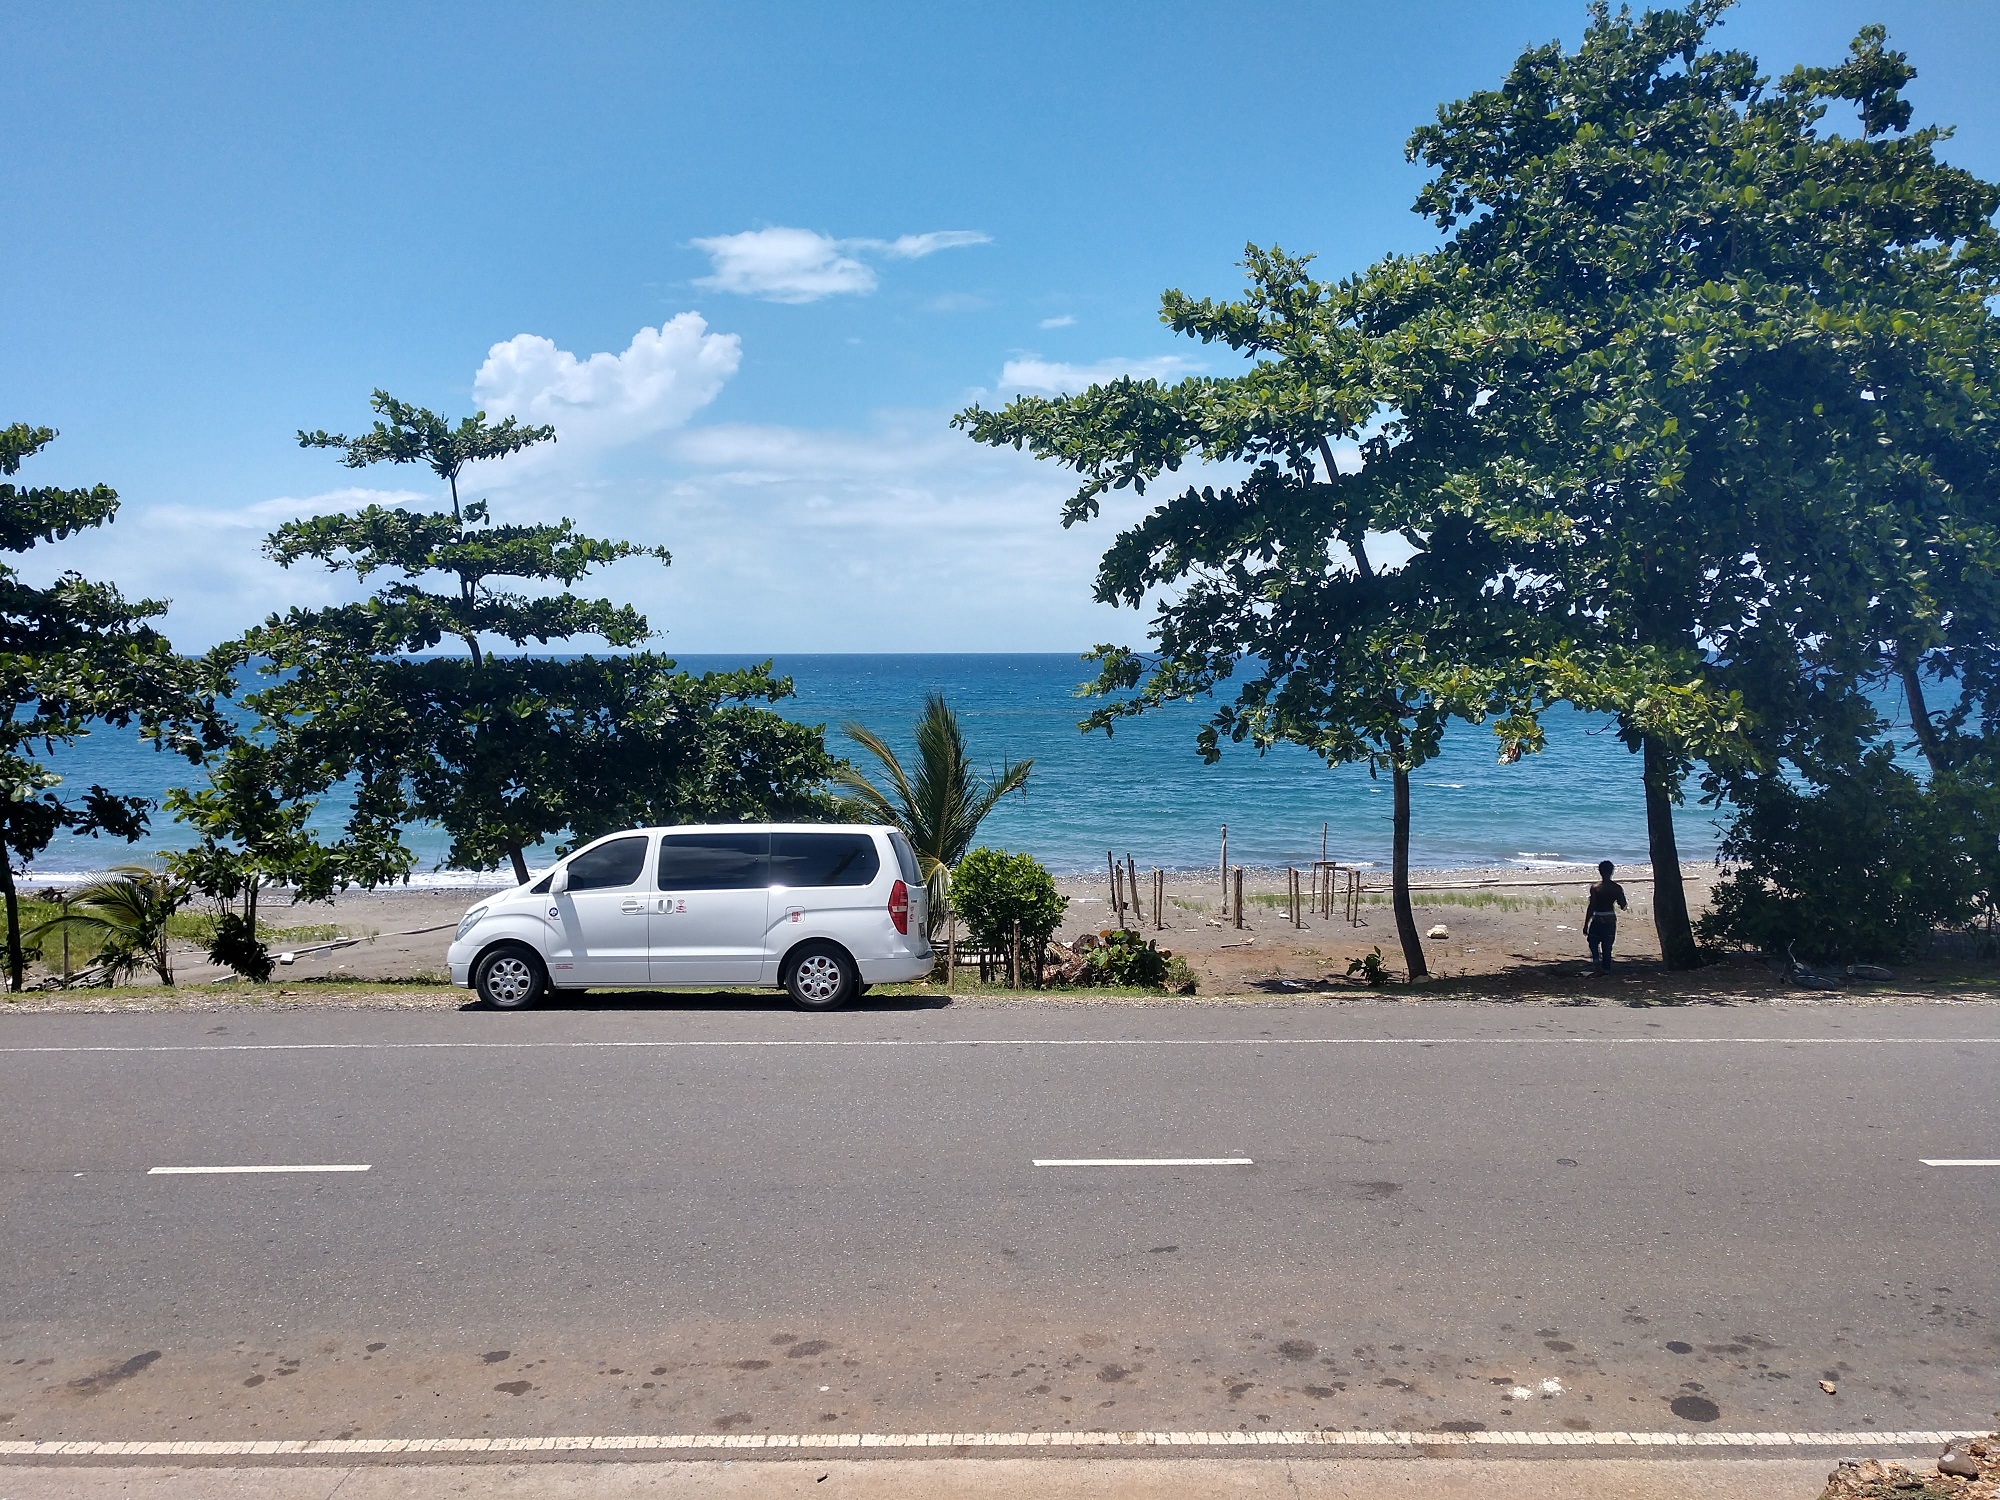 View of the sea from the restaurant. Also our taxi.